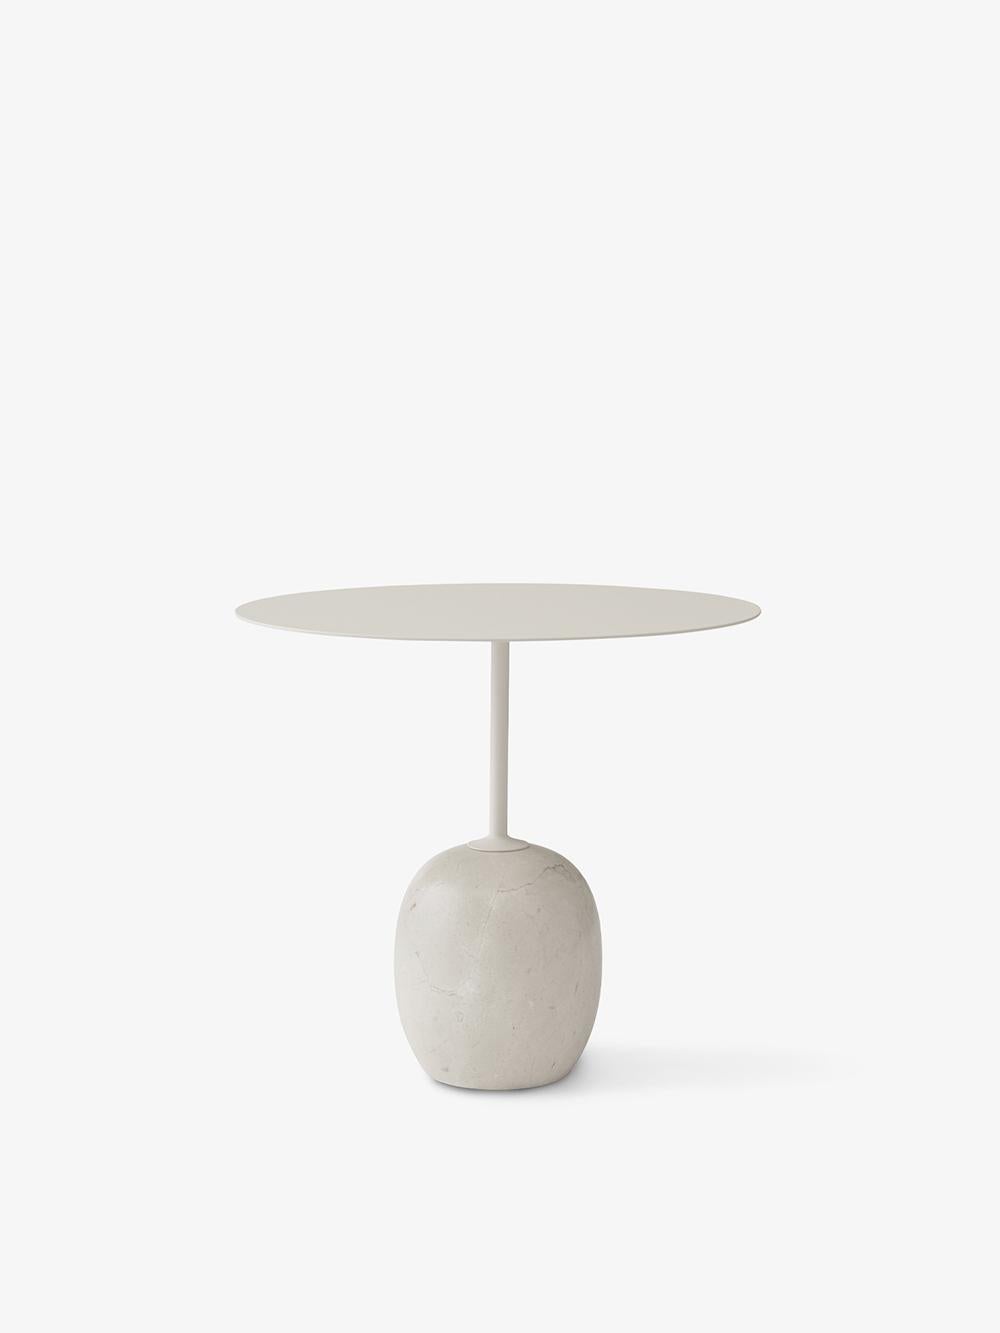 At first glance, Lato resembles a sculpture, with its slim, oval and round table top balanced by an oval-shaped base. 
Striking, graphic and poetic, its purity of form is proof that simple is sophisticated.
With Lato, Nichetto wanted to keep the